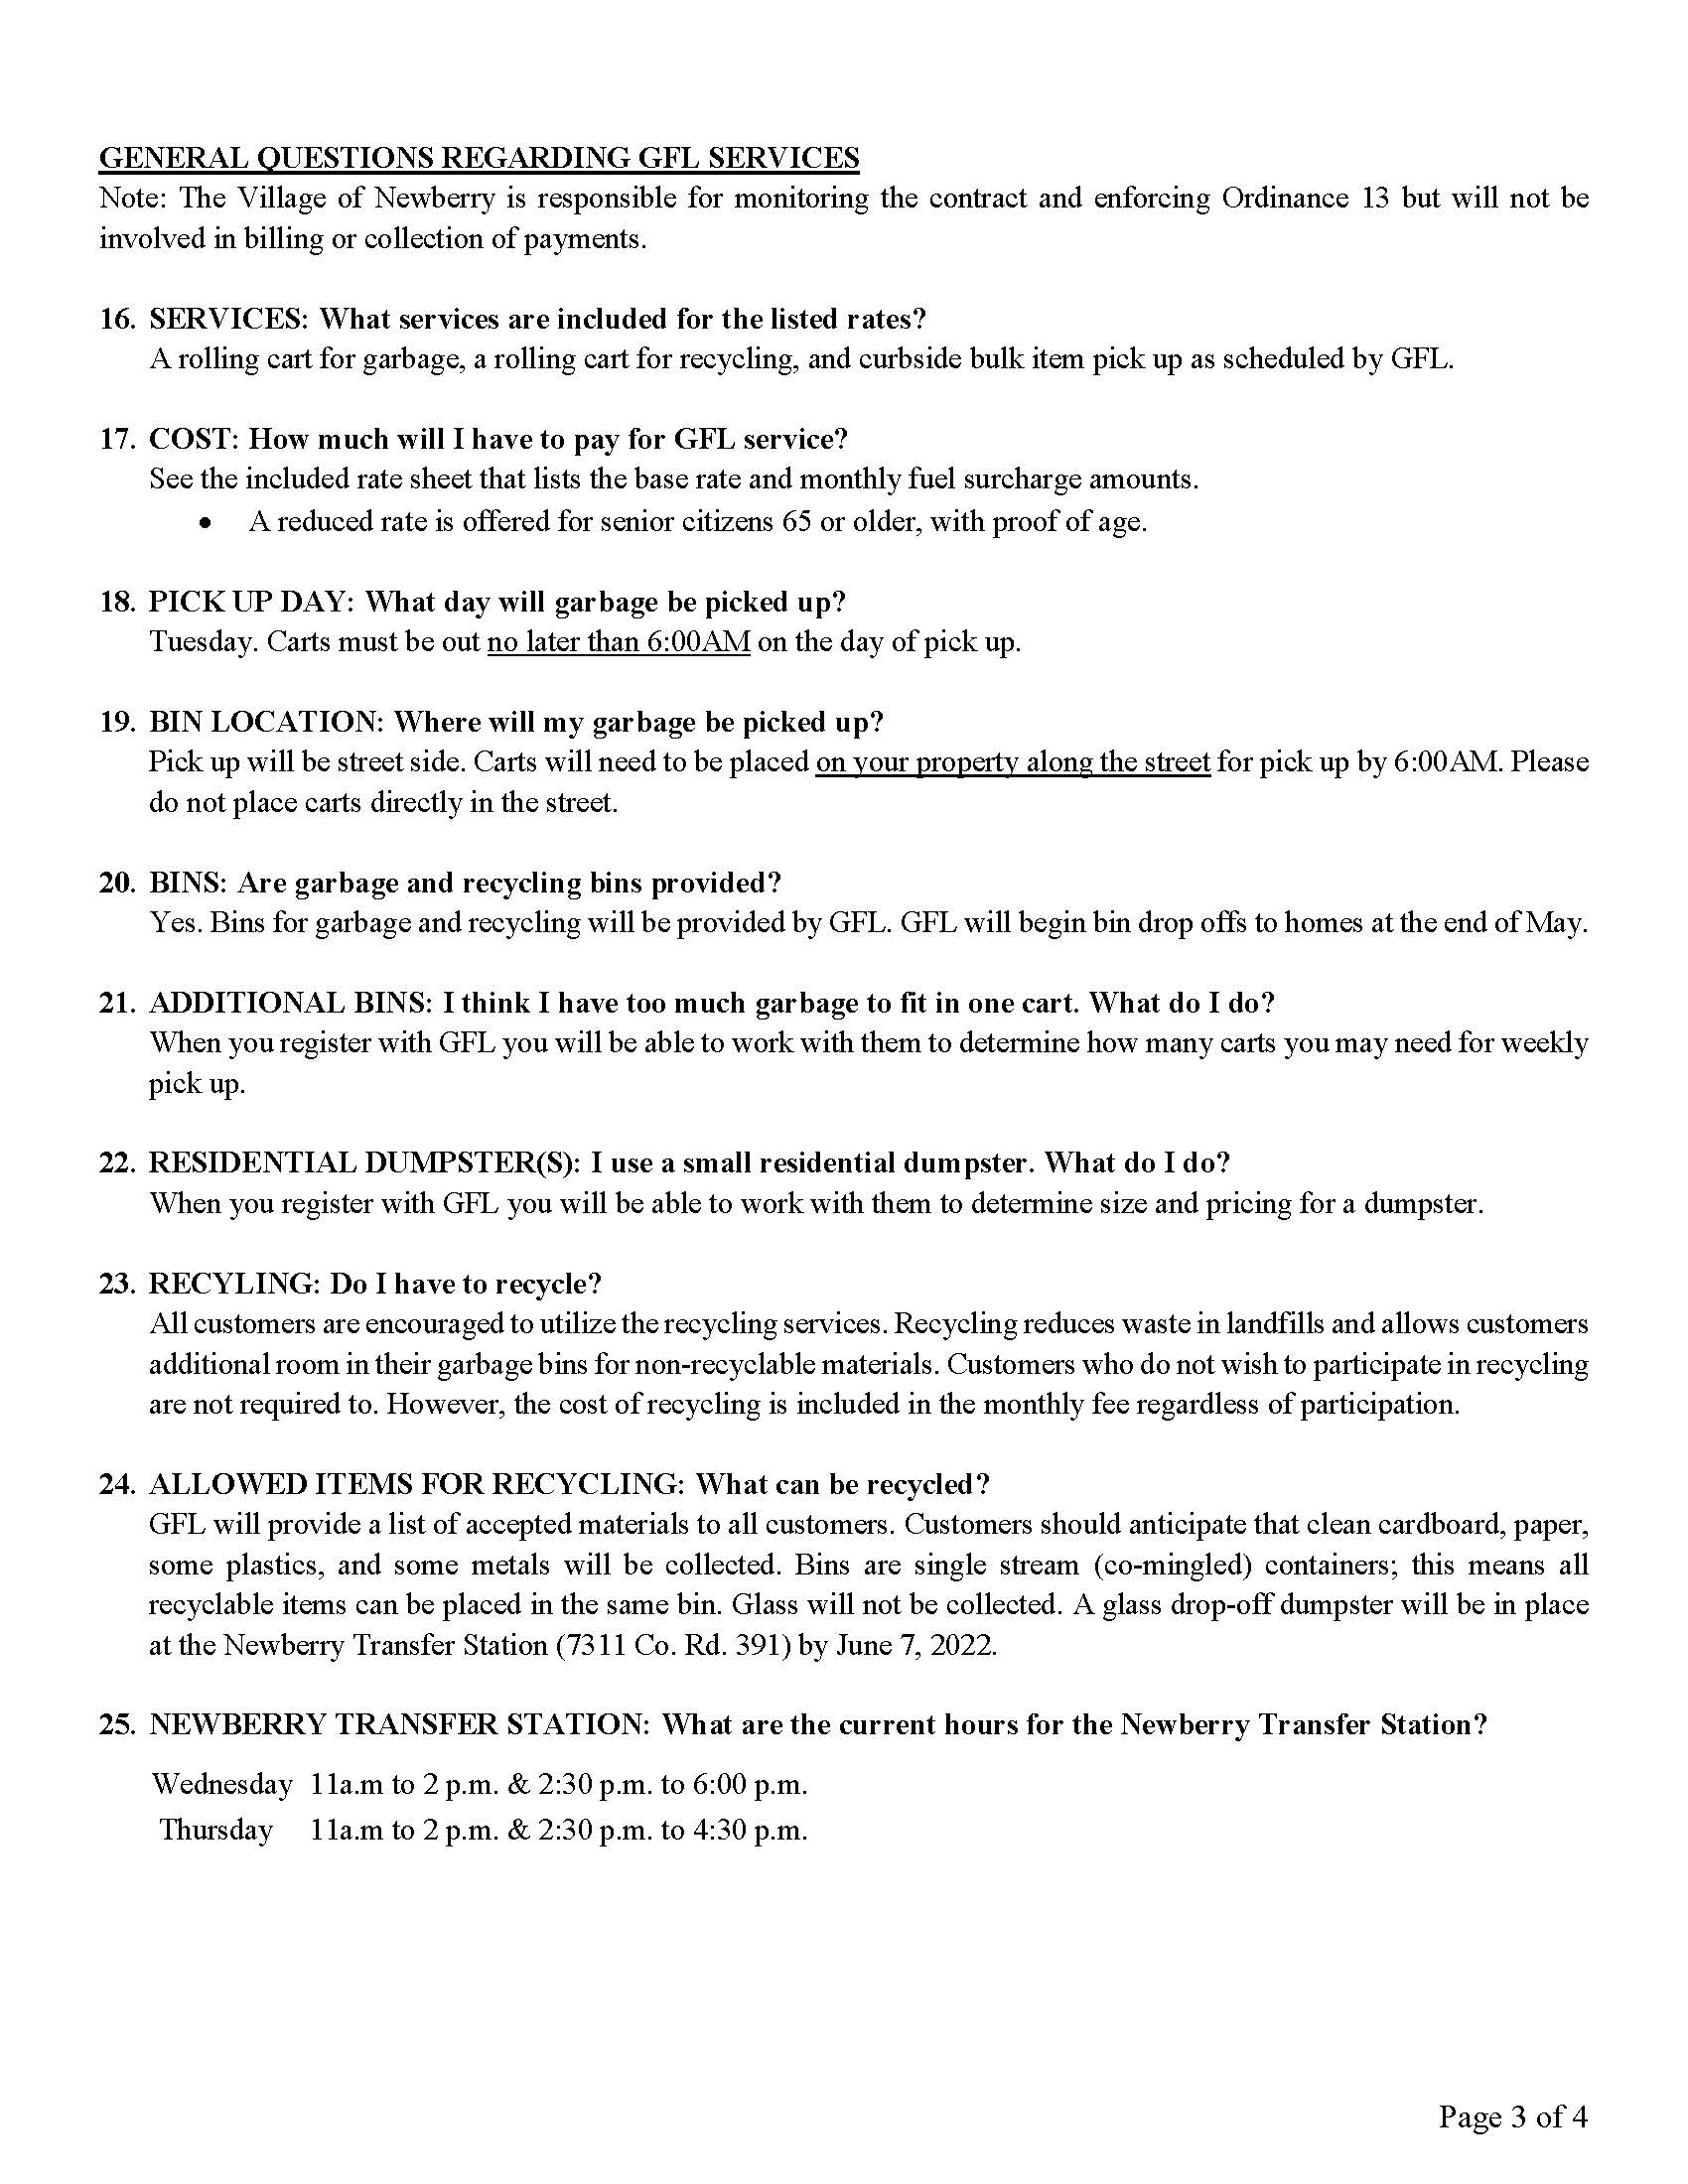 Garbage phase out FAQ list for Village residents as of 3.31.2022 final for mailing_Page_3